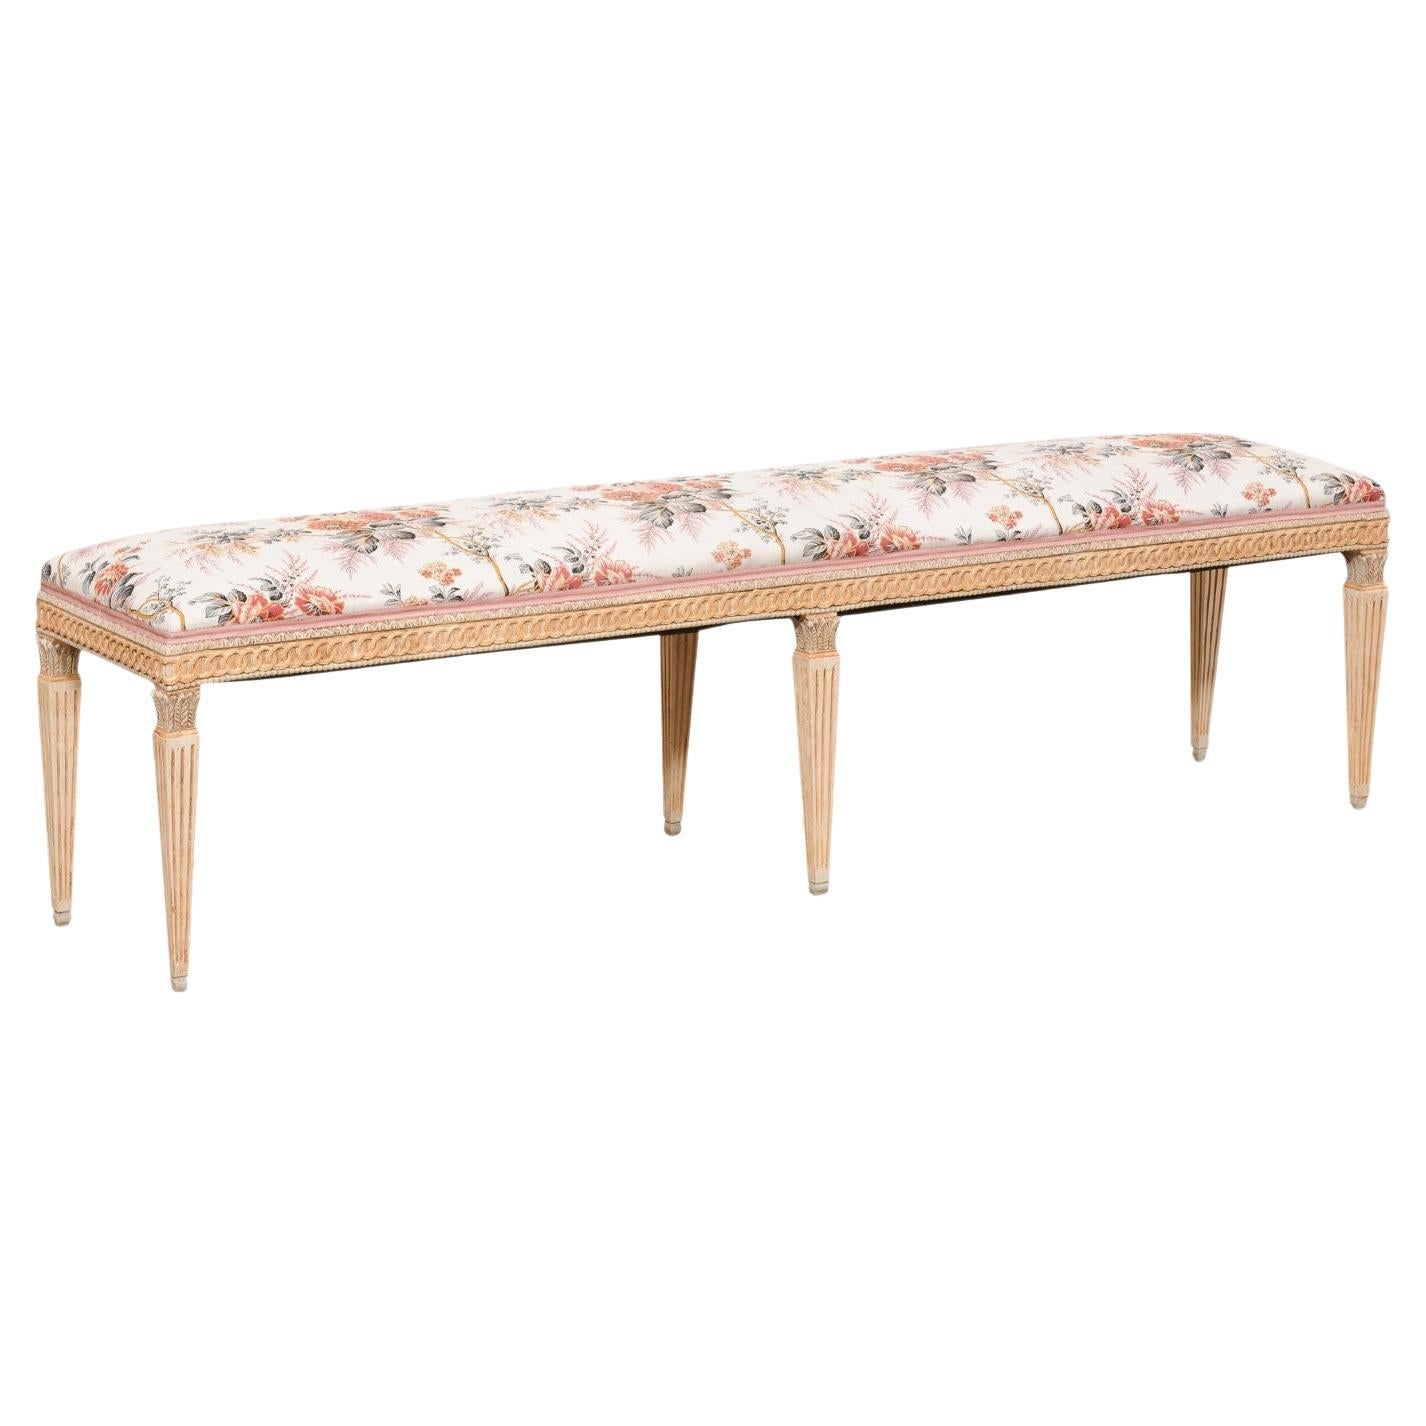 French Louis XVI Style Carved-Wood Slender Bench with Upholstered Seat For Sale